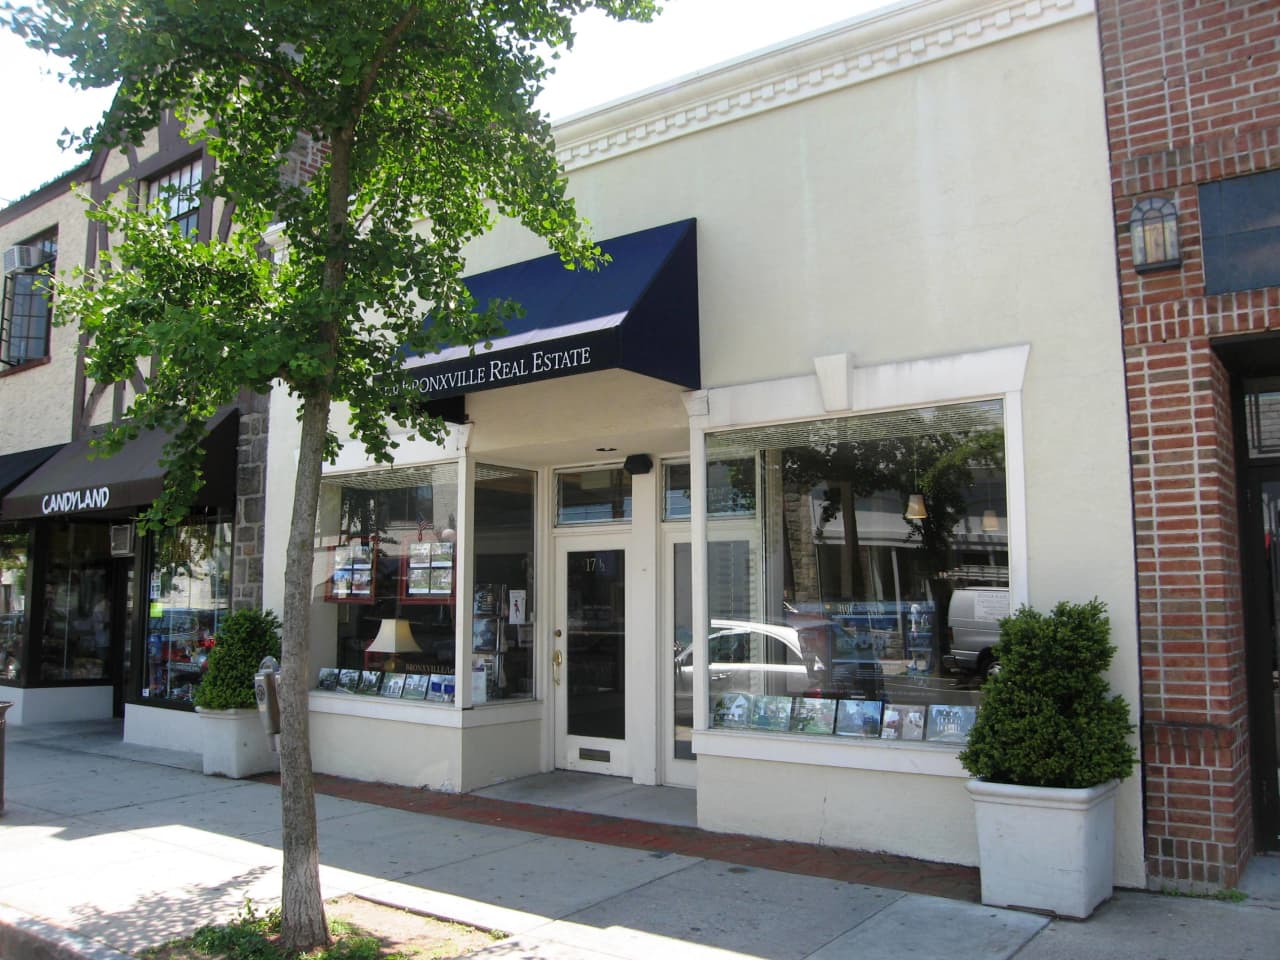 The outlook for real estate in Bronxville is looking positive, experts say. 